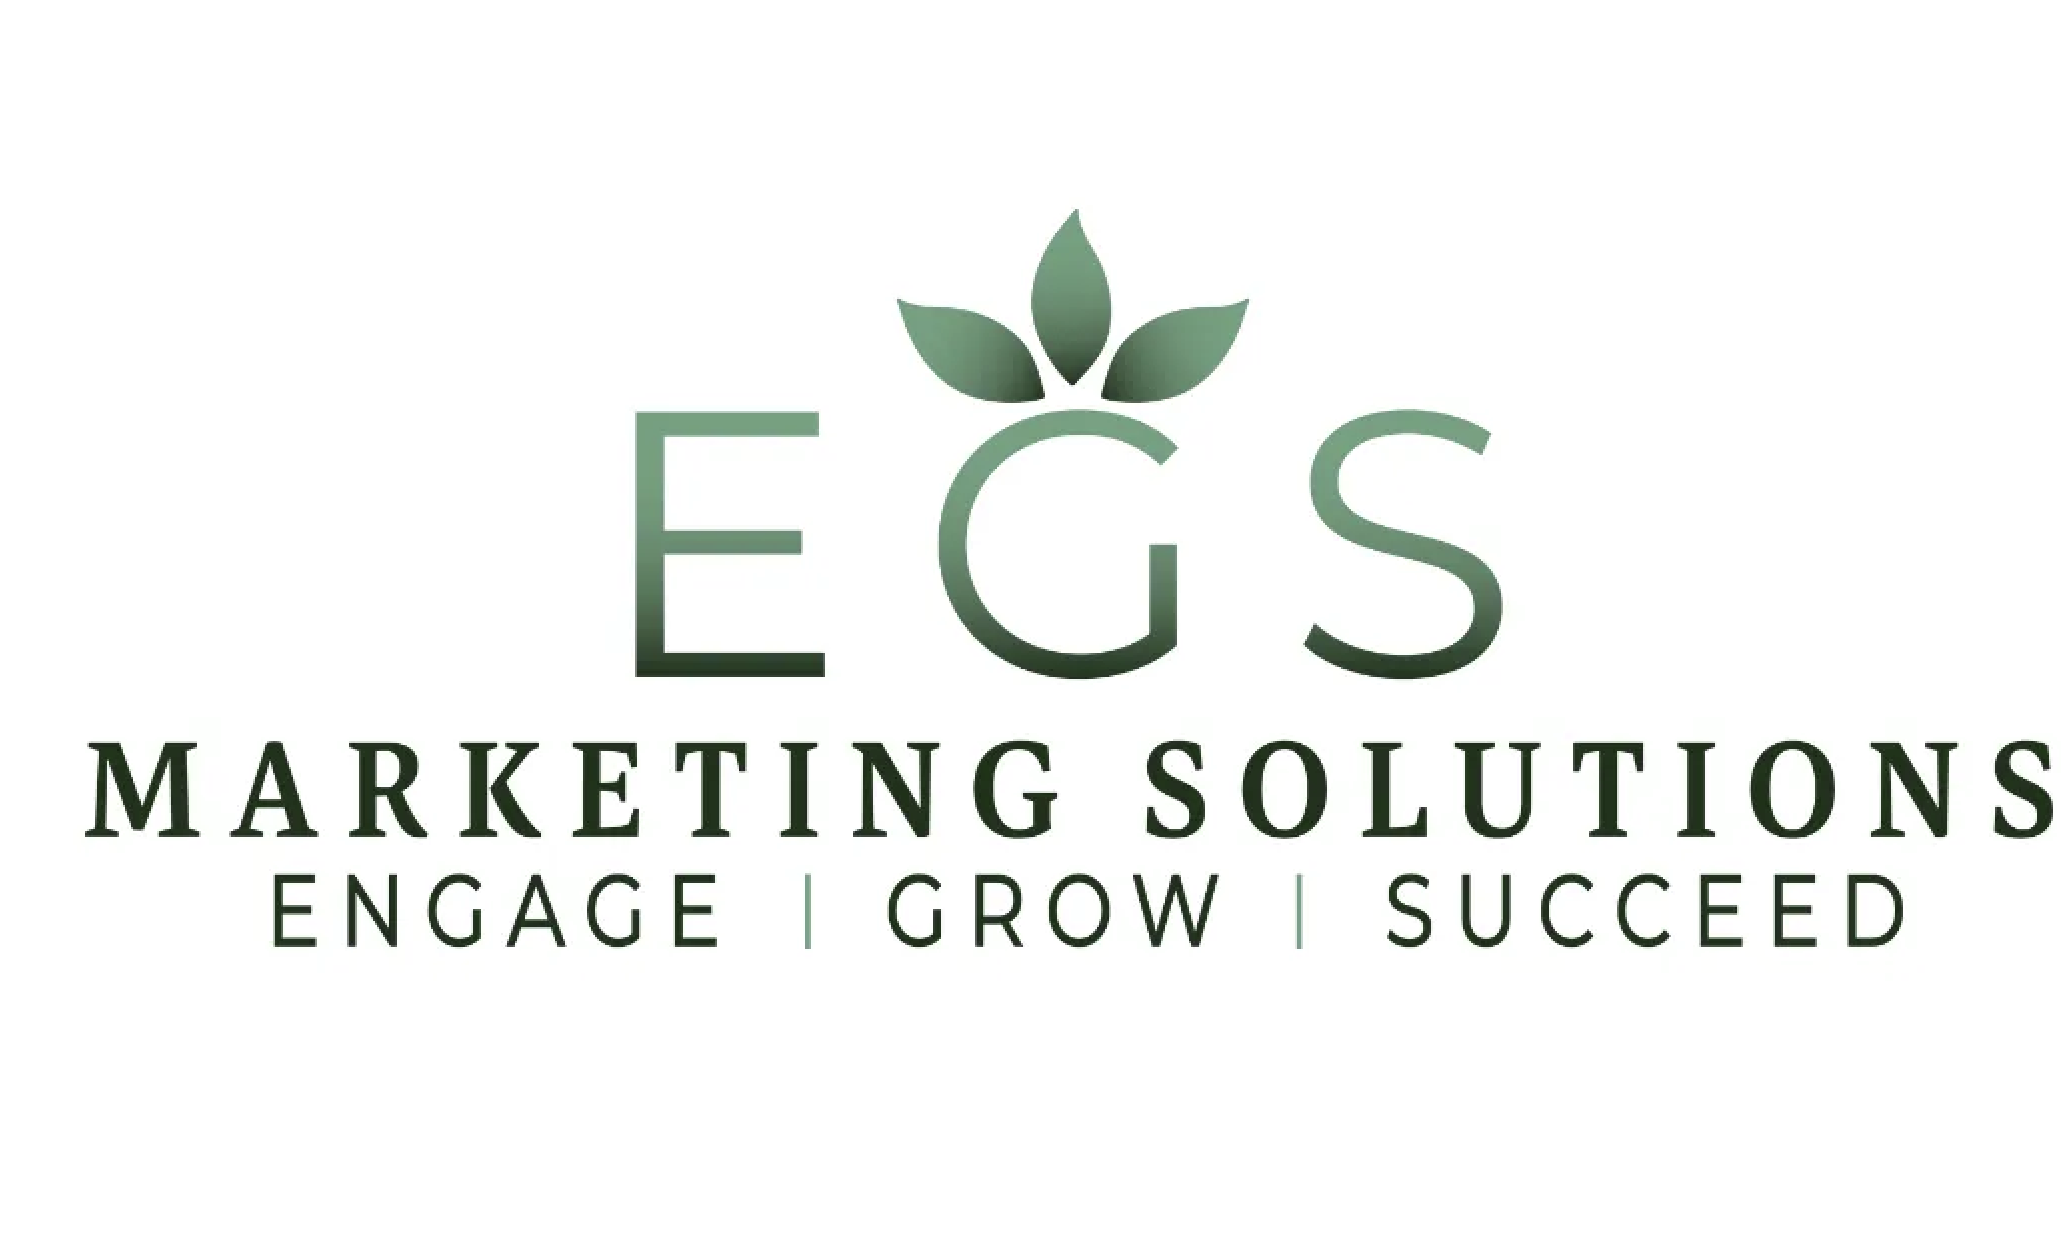 Marketing solutions to engage, grow and succeed in your direct care practice.